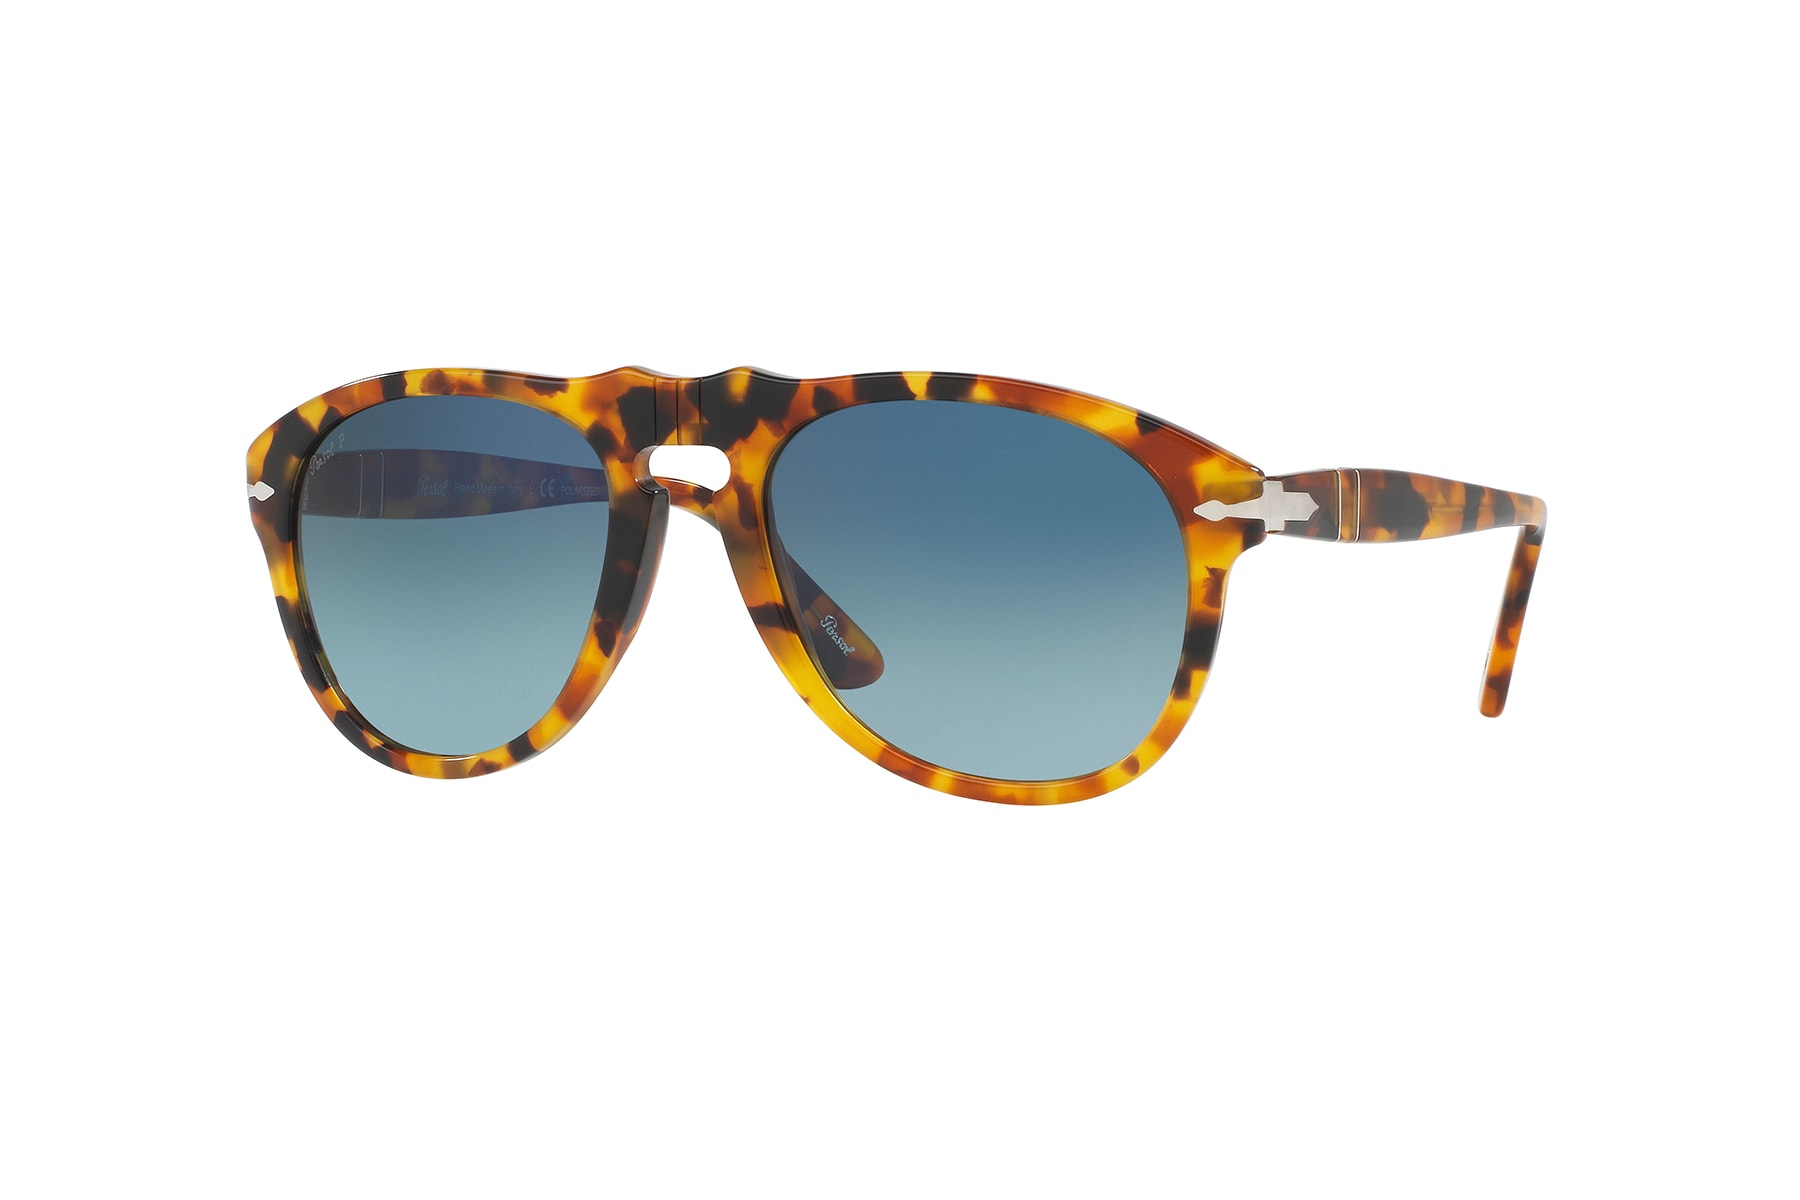 Persol "Good Point, Well Made" Collection